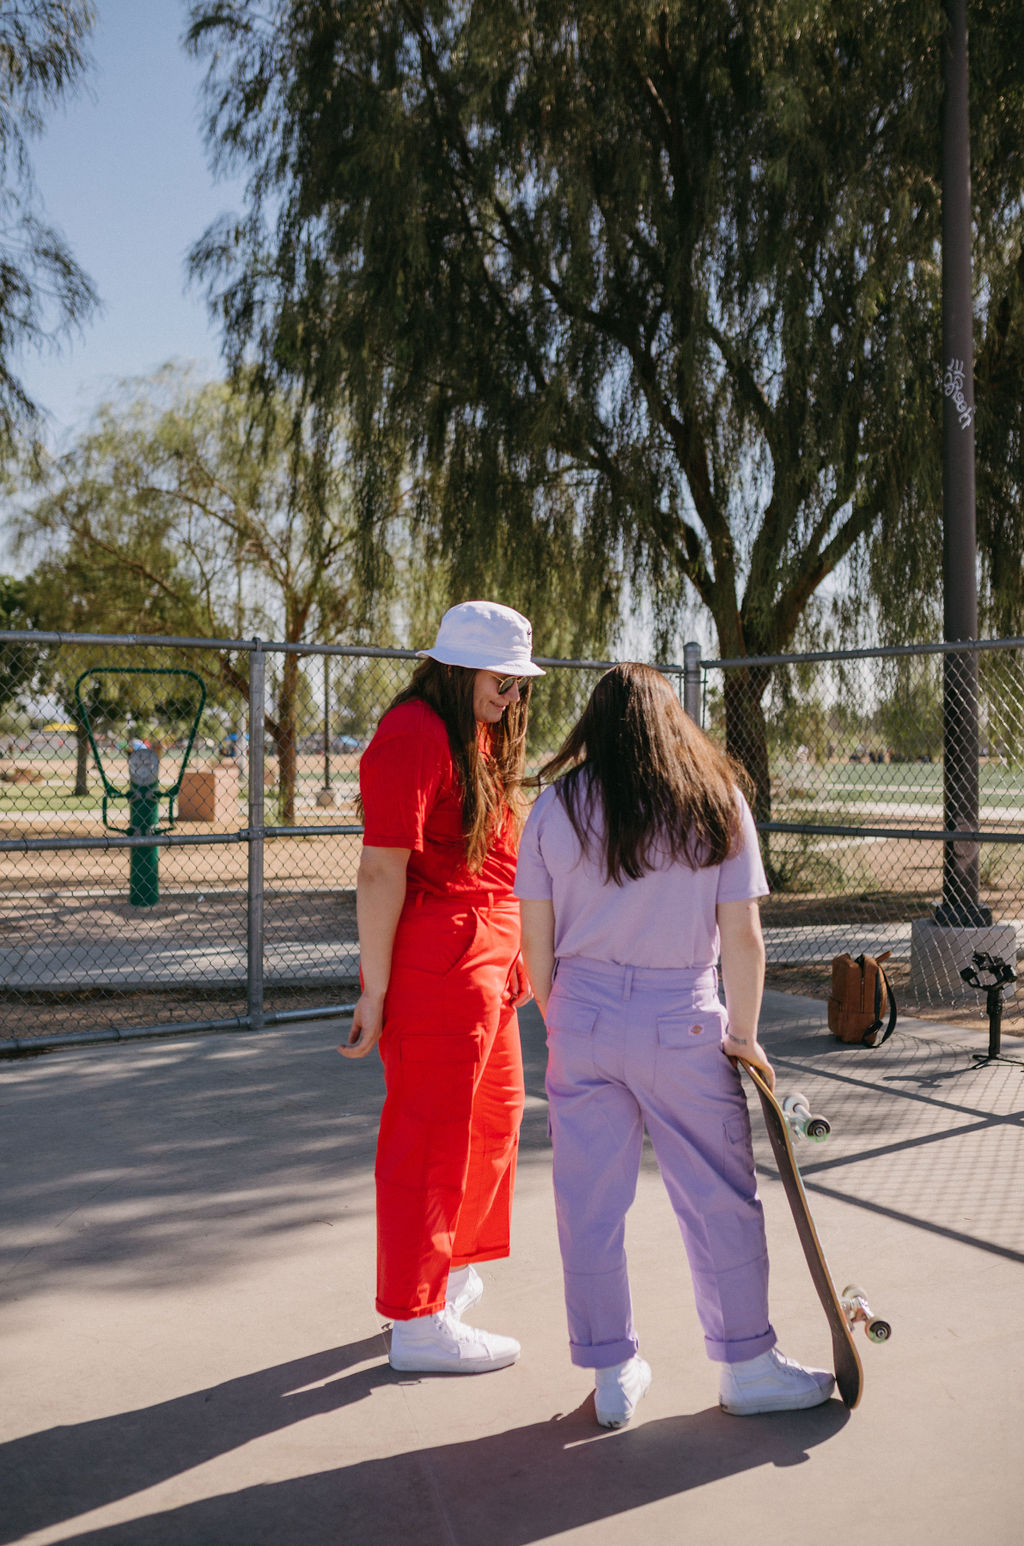 Two women in colorful attire discussing over a skateboard in an outdoor setting, representing collaboration in the brand design process